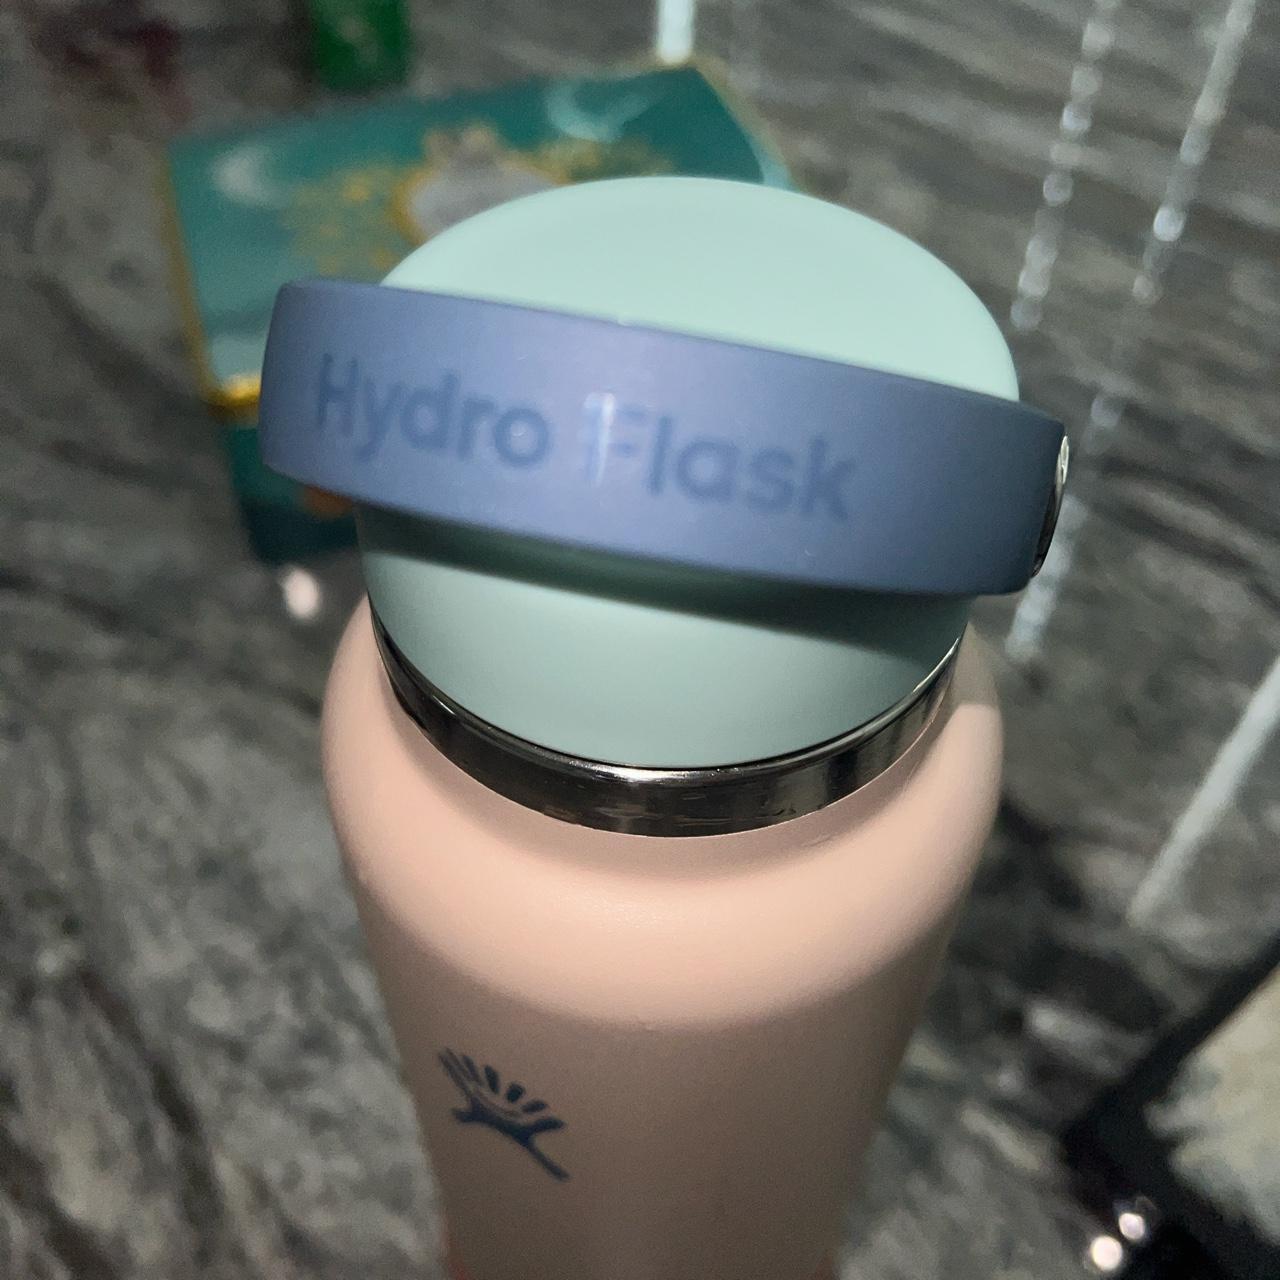 Limited Edition Mocha Hydroflask New with box and - Depop